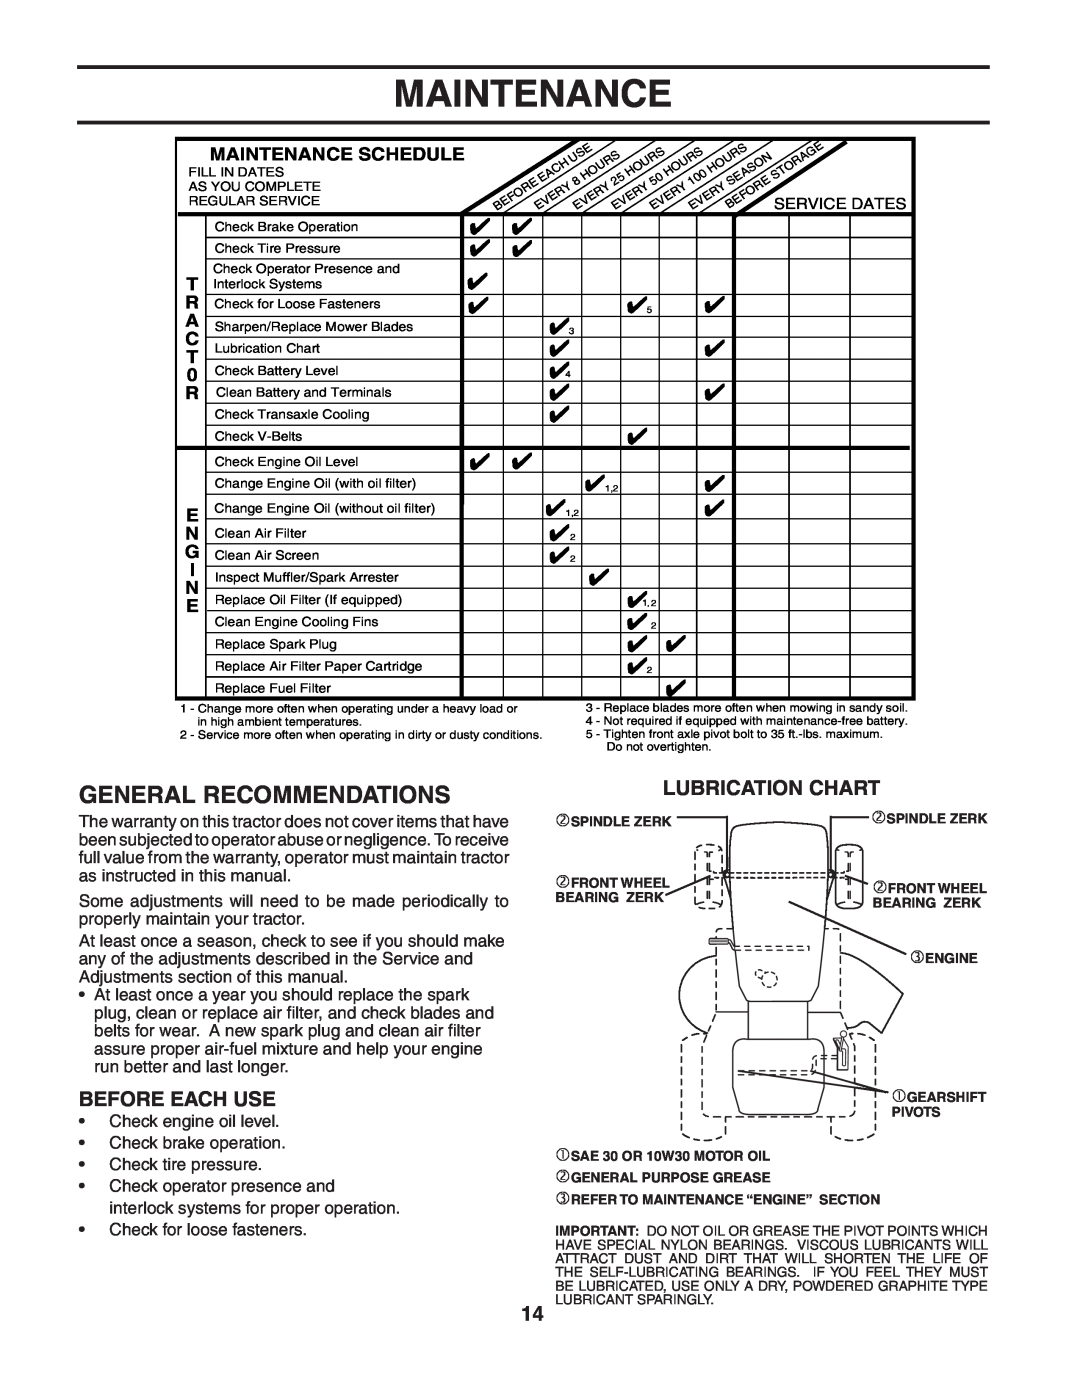 Poulan PO17542STA manual Maintenance, General Recommendations, Before Each Use, Lubrication Chart 